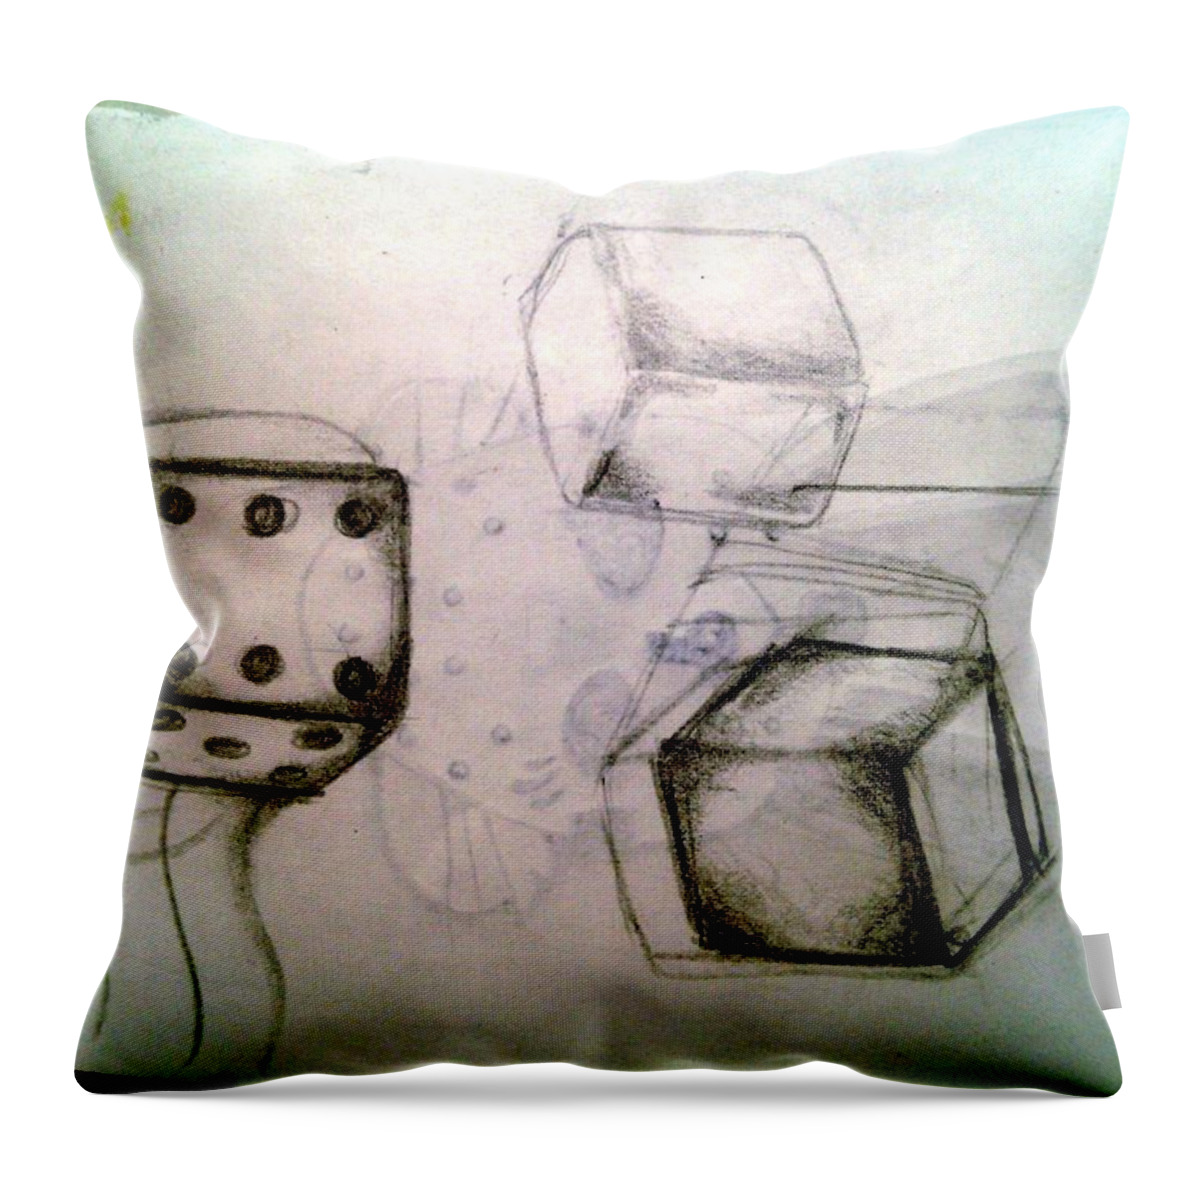 Black Art Throw Pillow featuring the drawing Untitled 17 by A S 